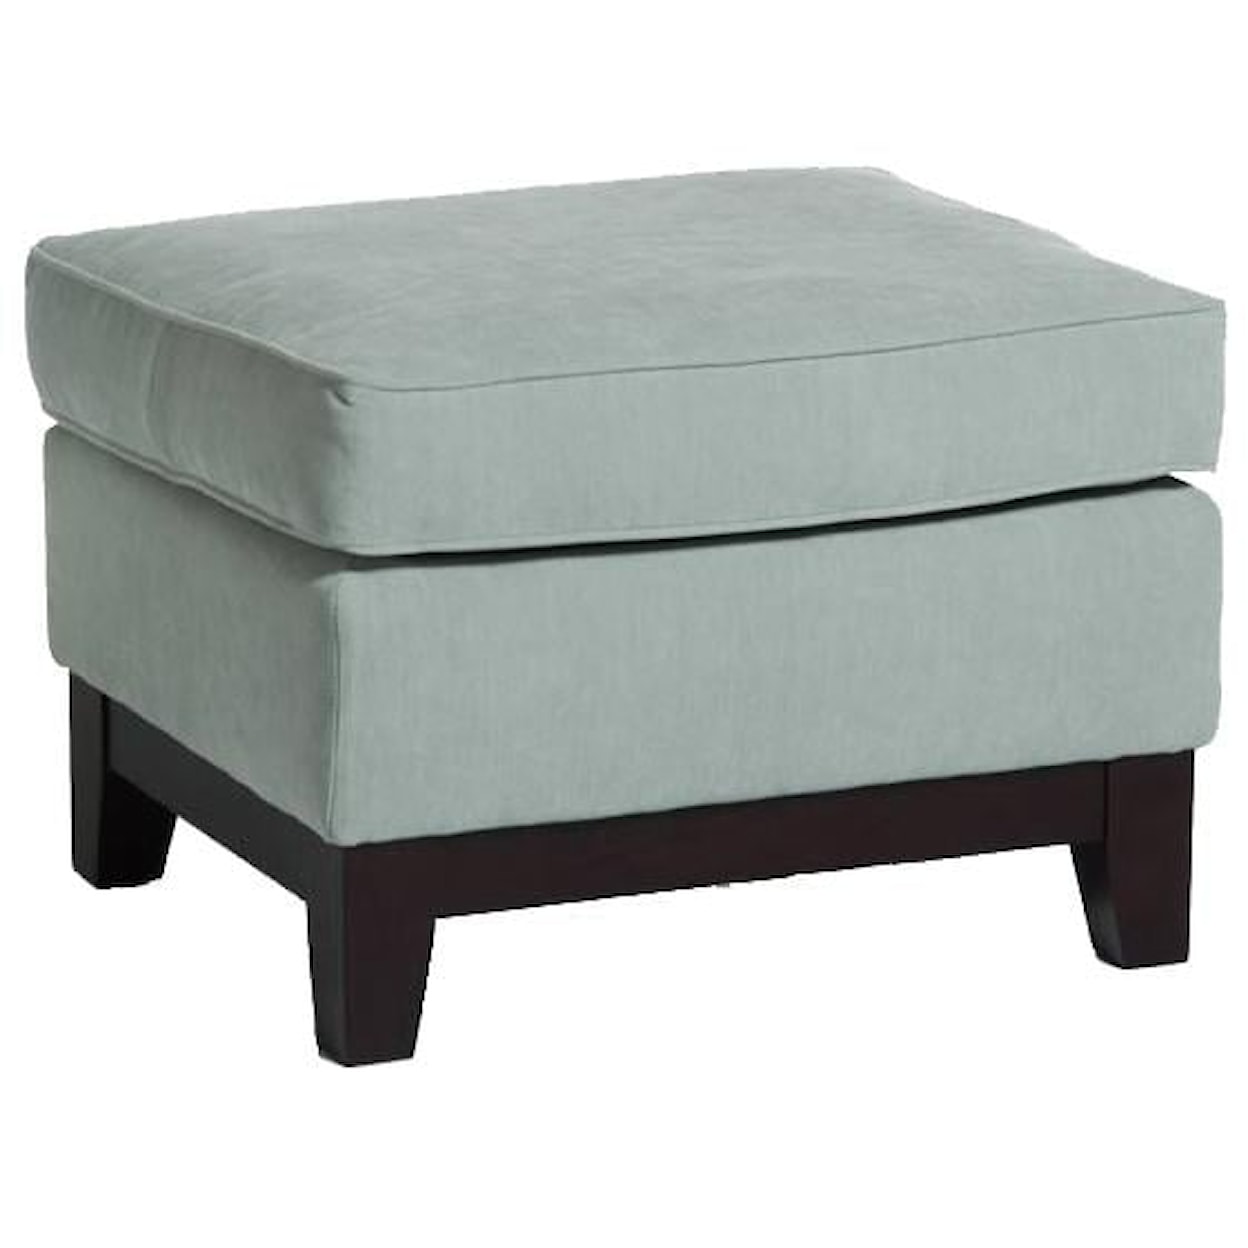 Best Home Furnishings Ottomans Contemporary Ottoman